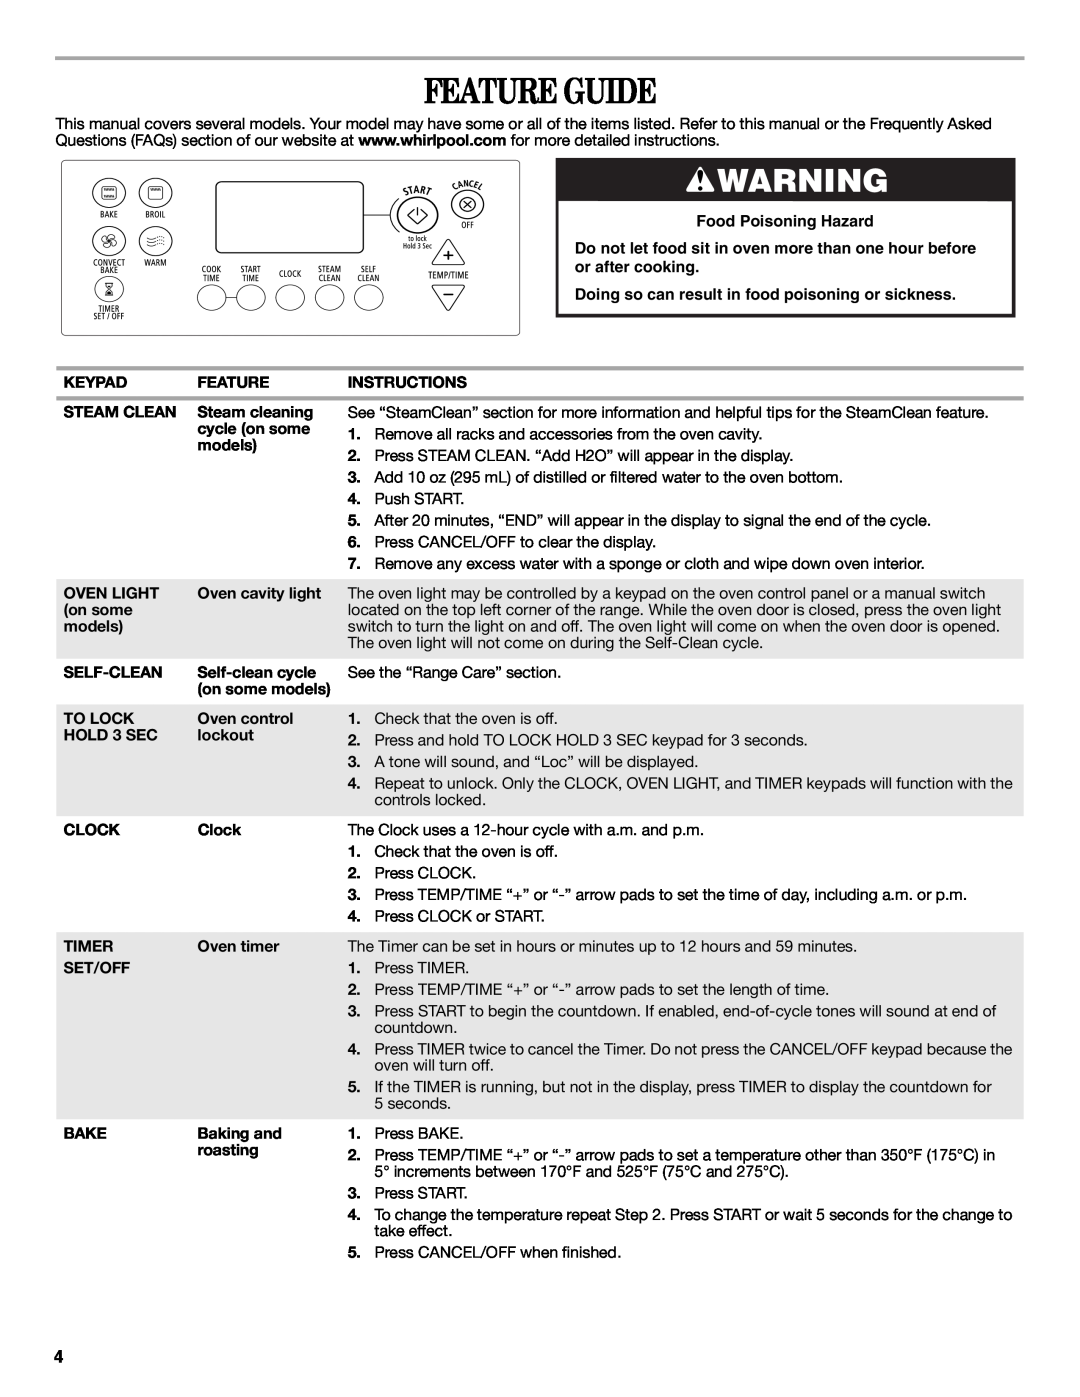 Whirlpool W10200357C warranty Feature Guide, Food Poisoning Hazard, Doing so can result in food poisoning or sickness 